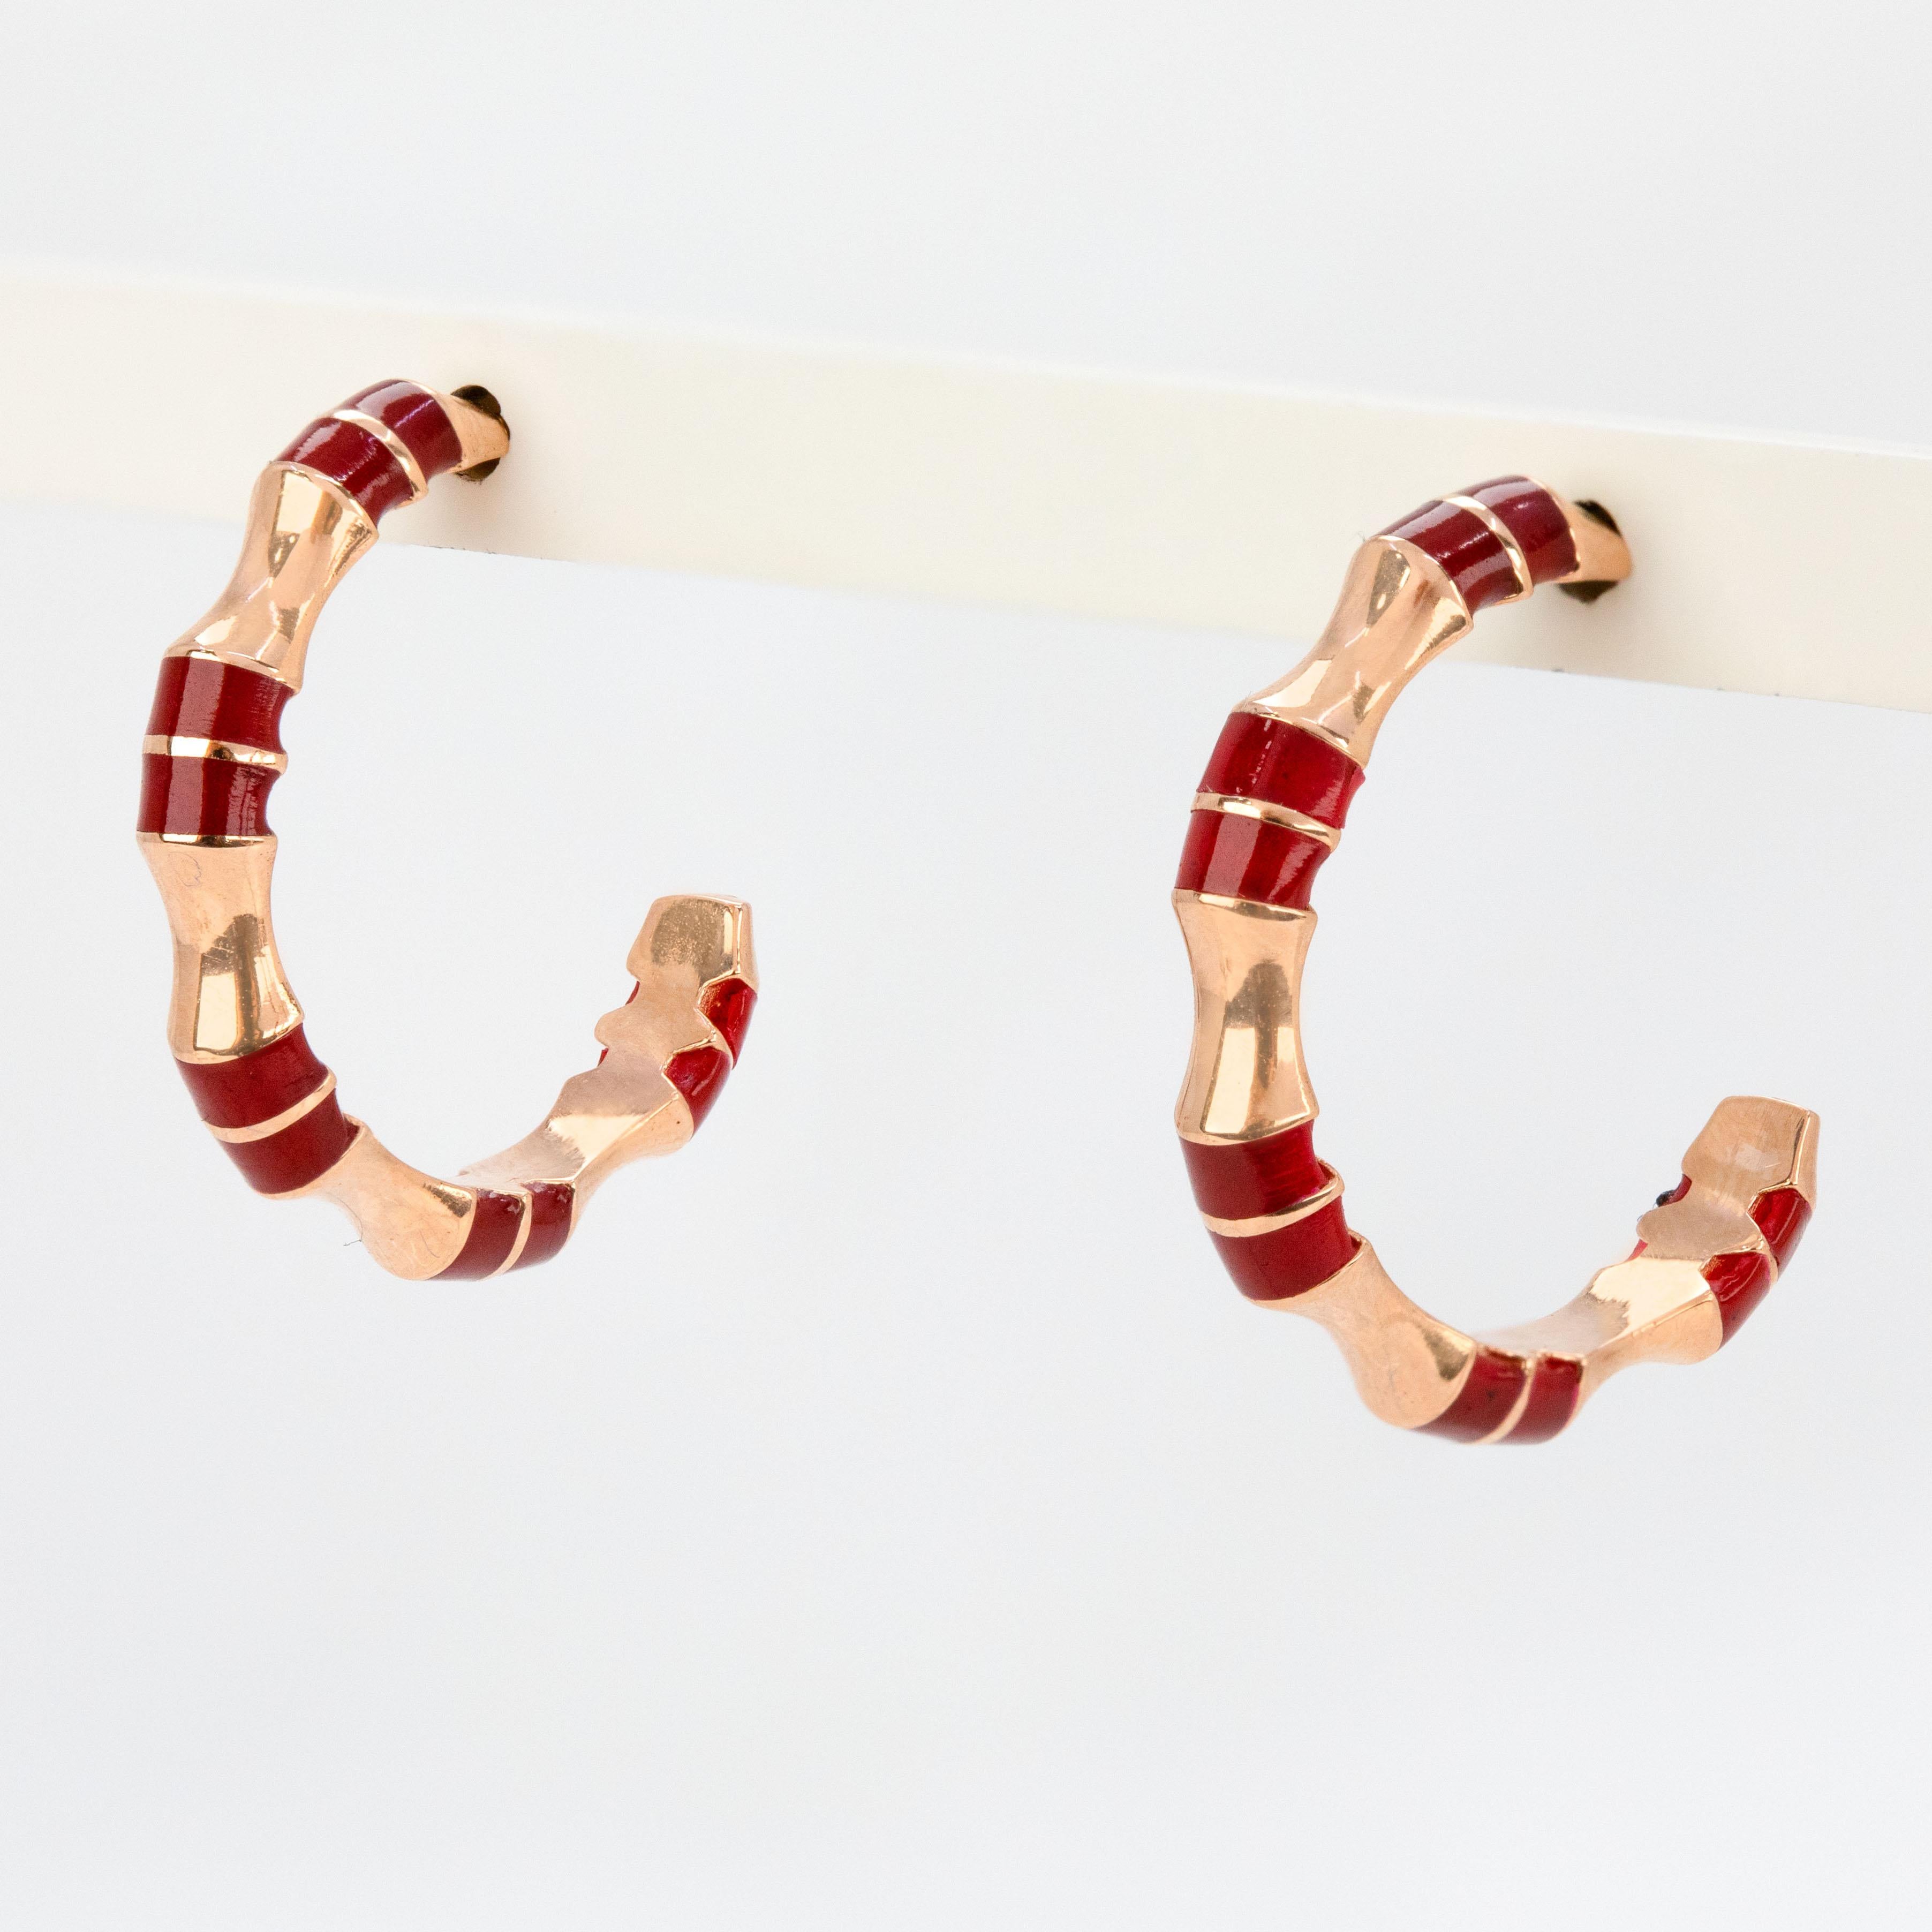 14K Gold White Enameled Circle Earrings - Solid Gold C Shaped Earrings, Gold and Burgundy Enameled Half Hoop Circle Earrings

This earrings was made with quality materials and excellent handwork. I guarantee the quality assurance of my handwork and